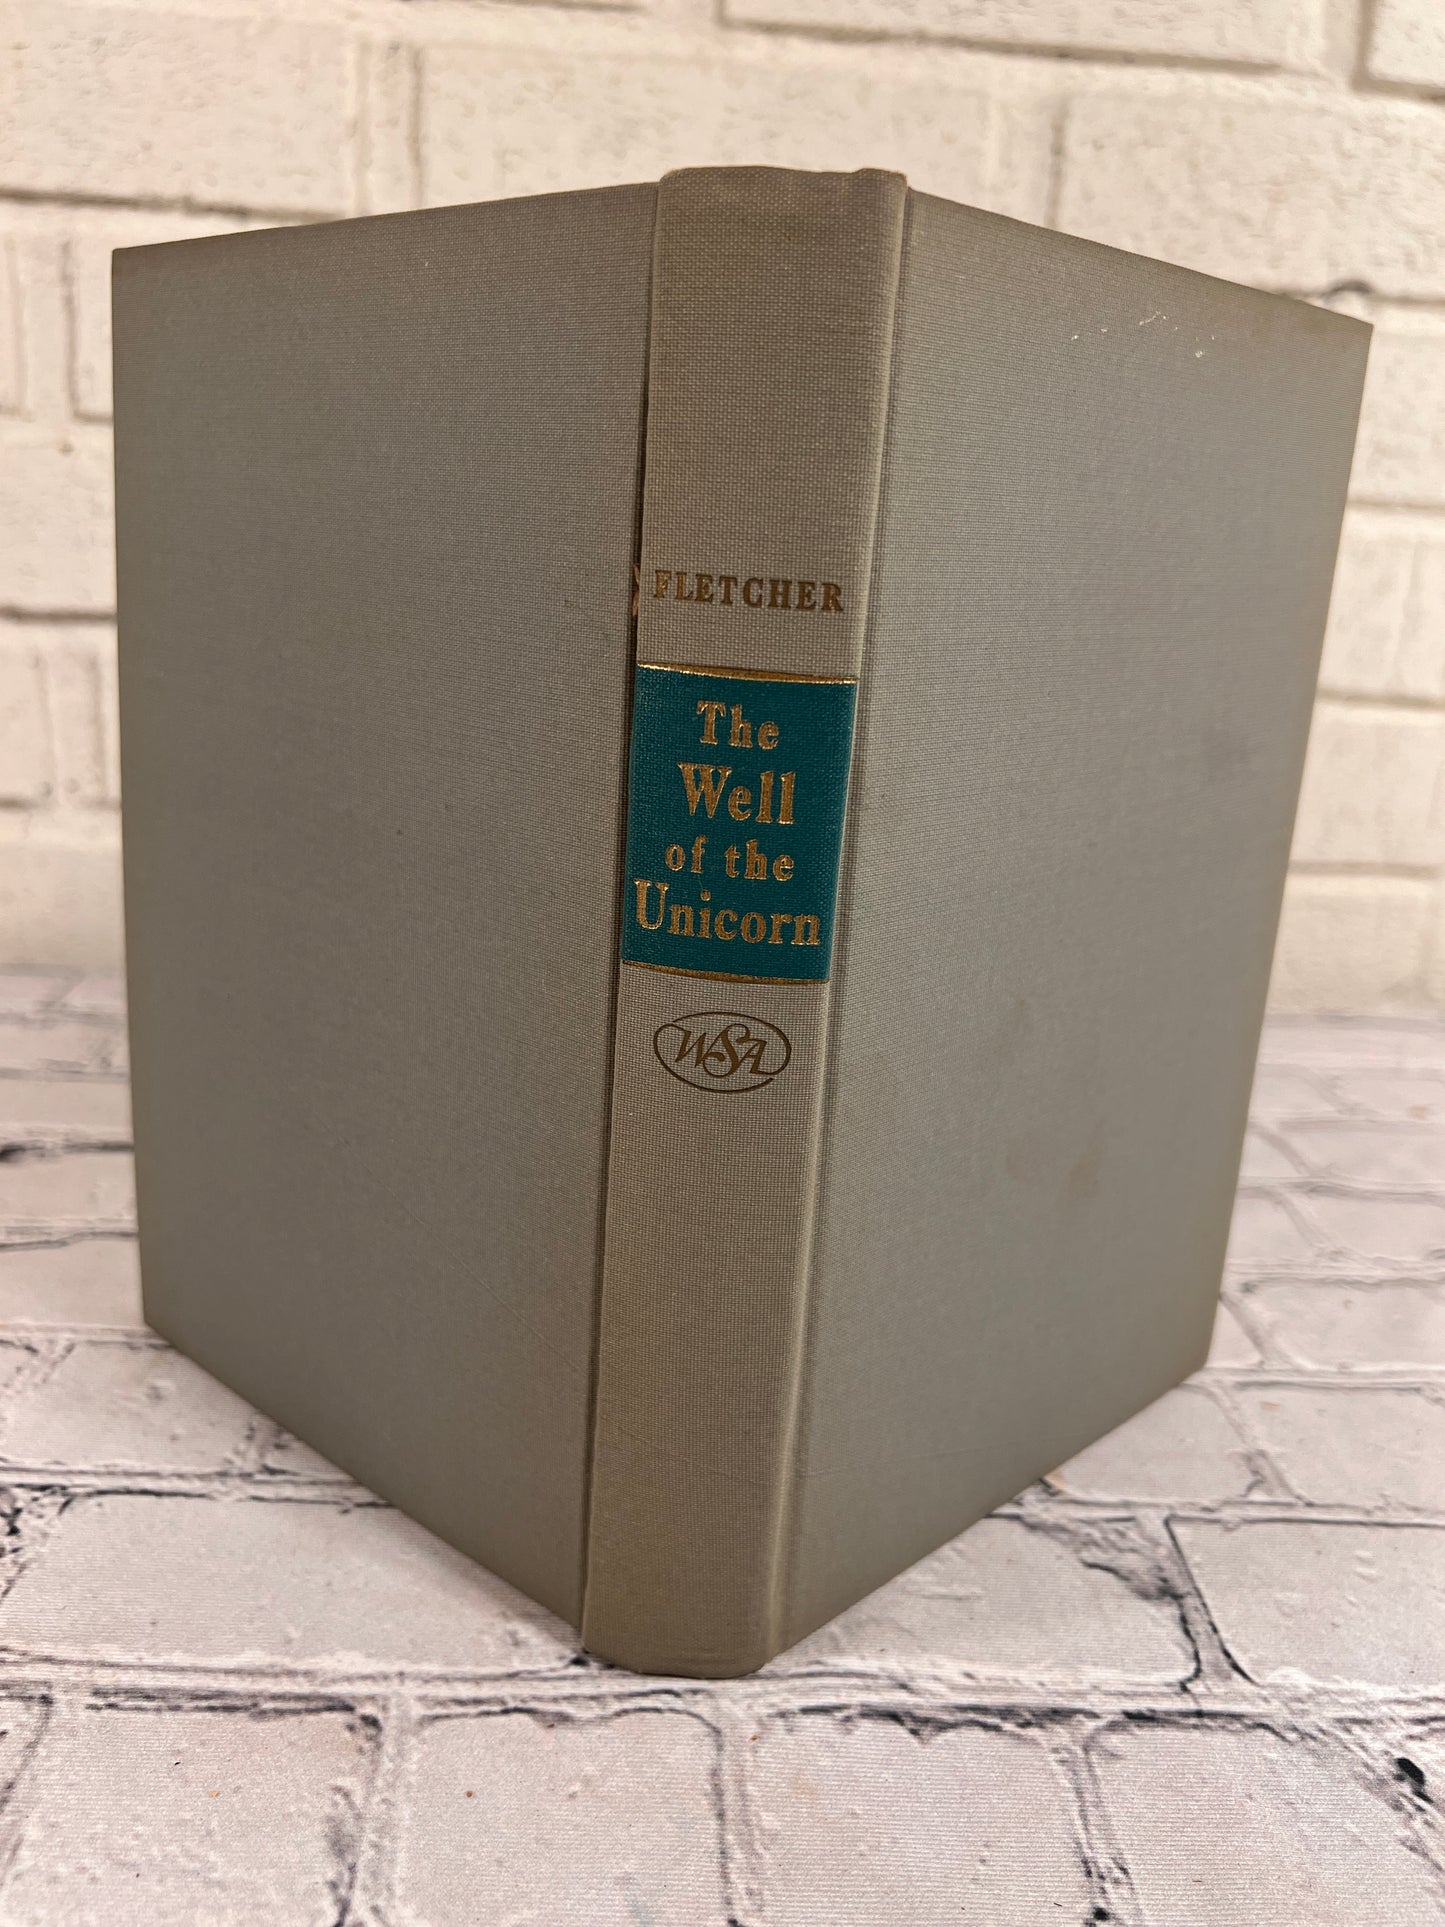 The Well of the Unicorn by George U. Fletcher [1948 · 1st Edition · 1st Printing]